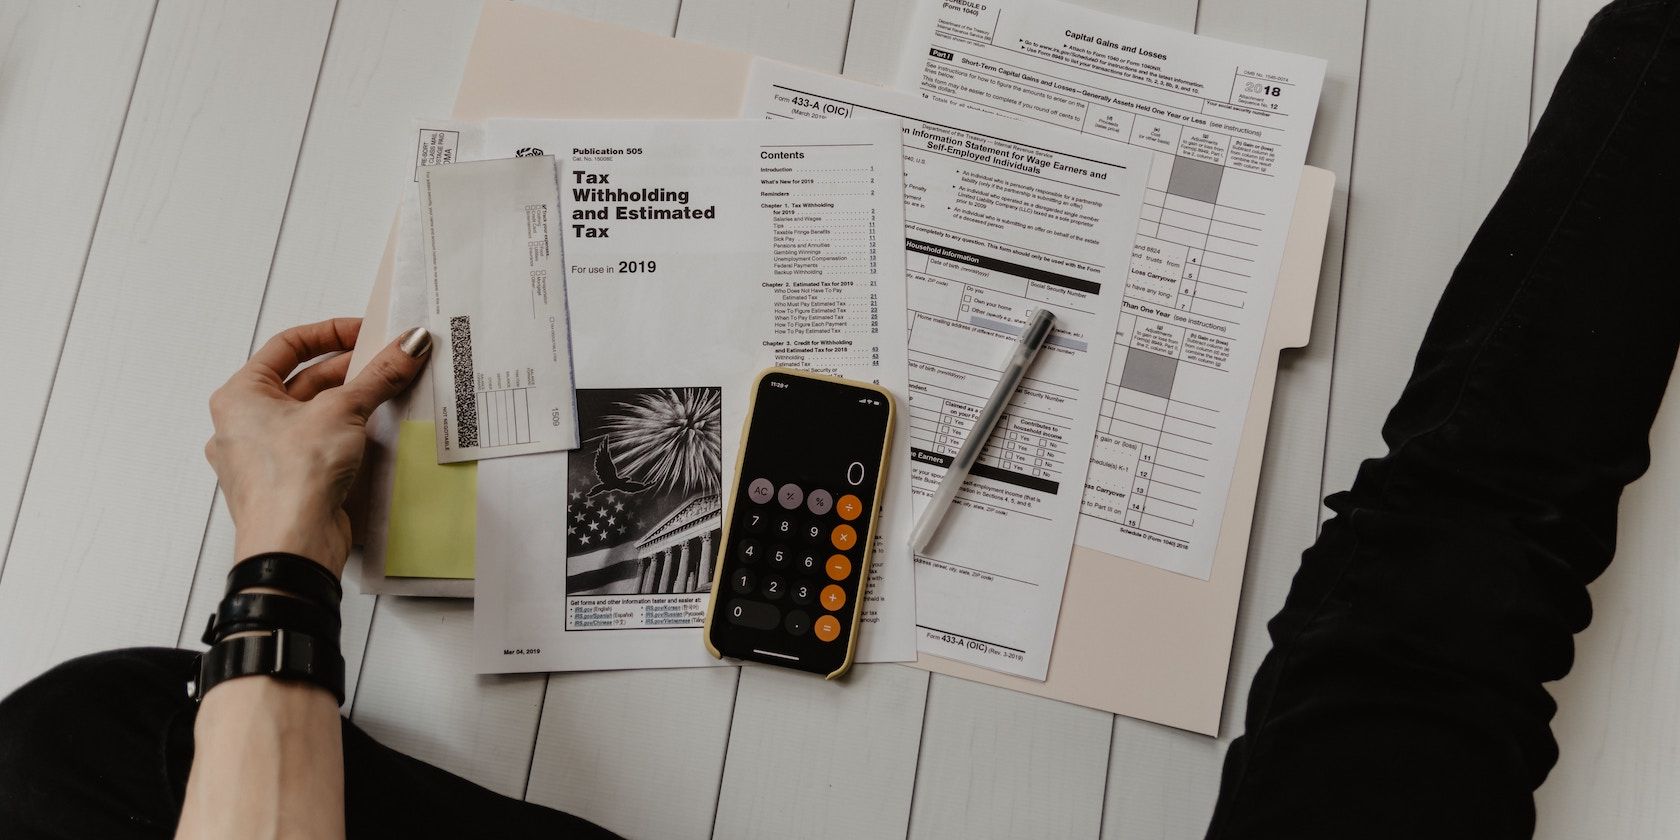 Taxation forms and a calculator